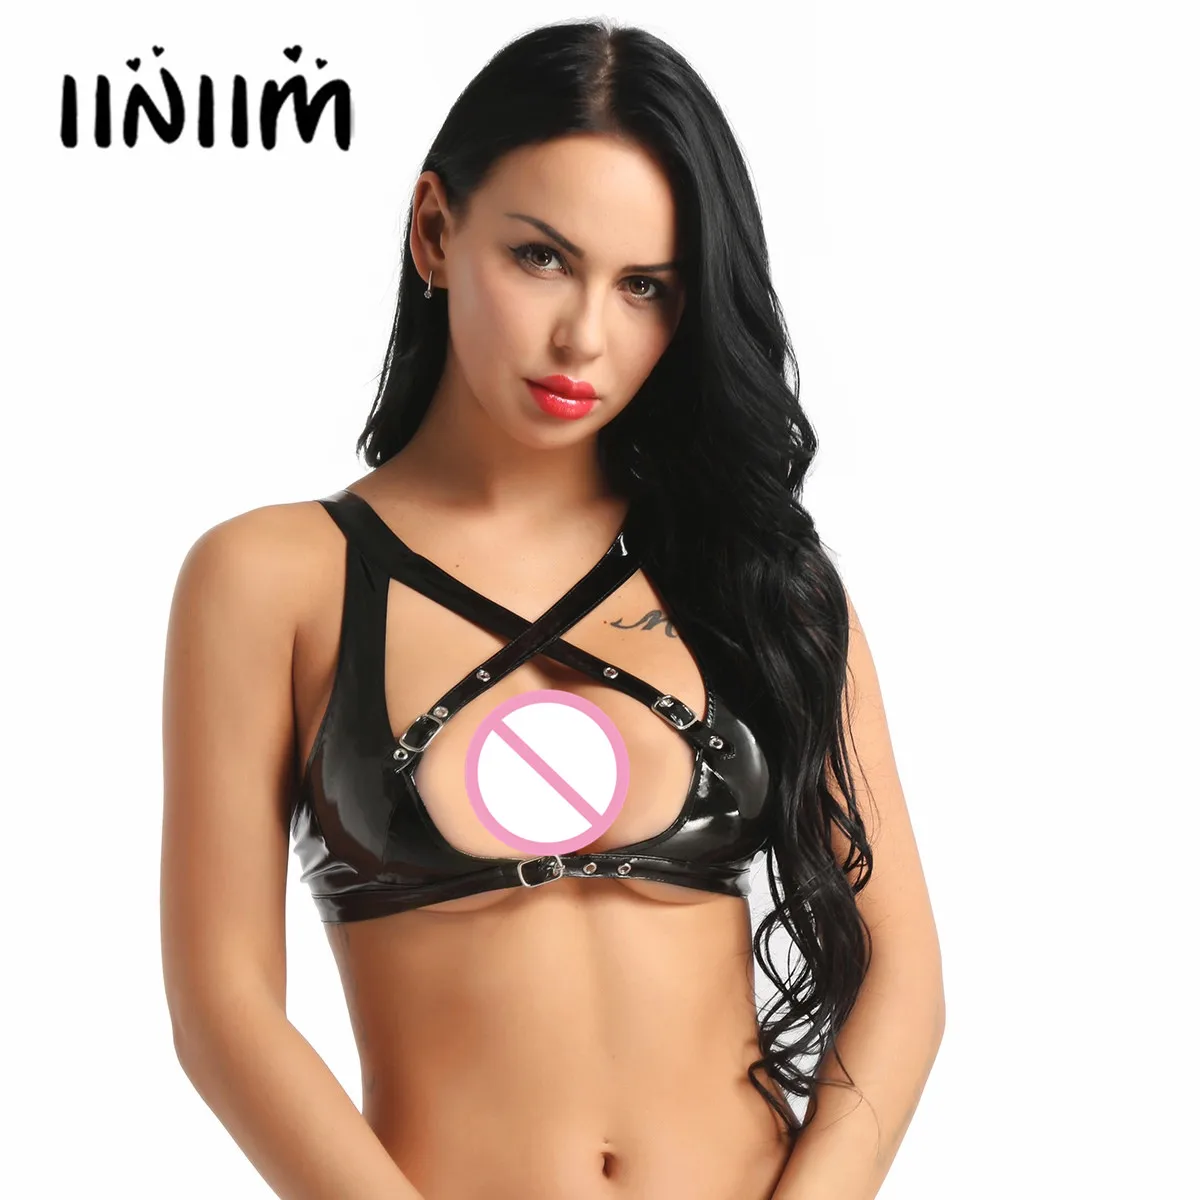 

Womens Ladies Camis Tanks Wetlook Lingerie Sexy Club Exotic Tanks Leather Wire-free Femme Unlined Bra Top with Buckle Straps